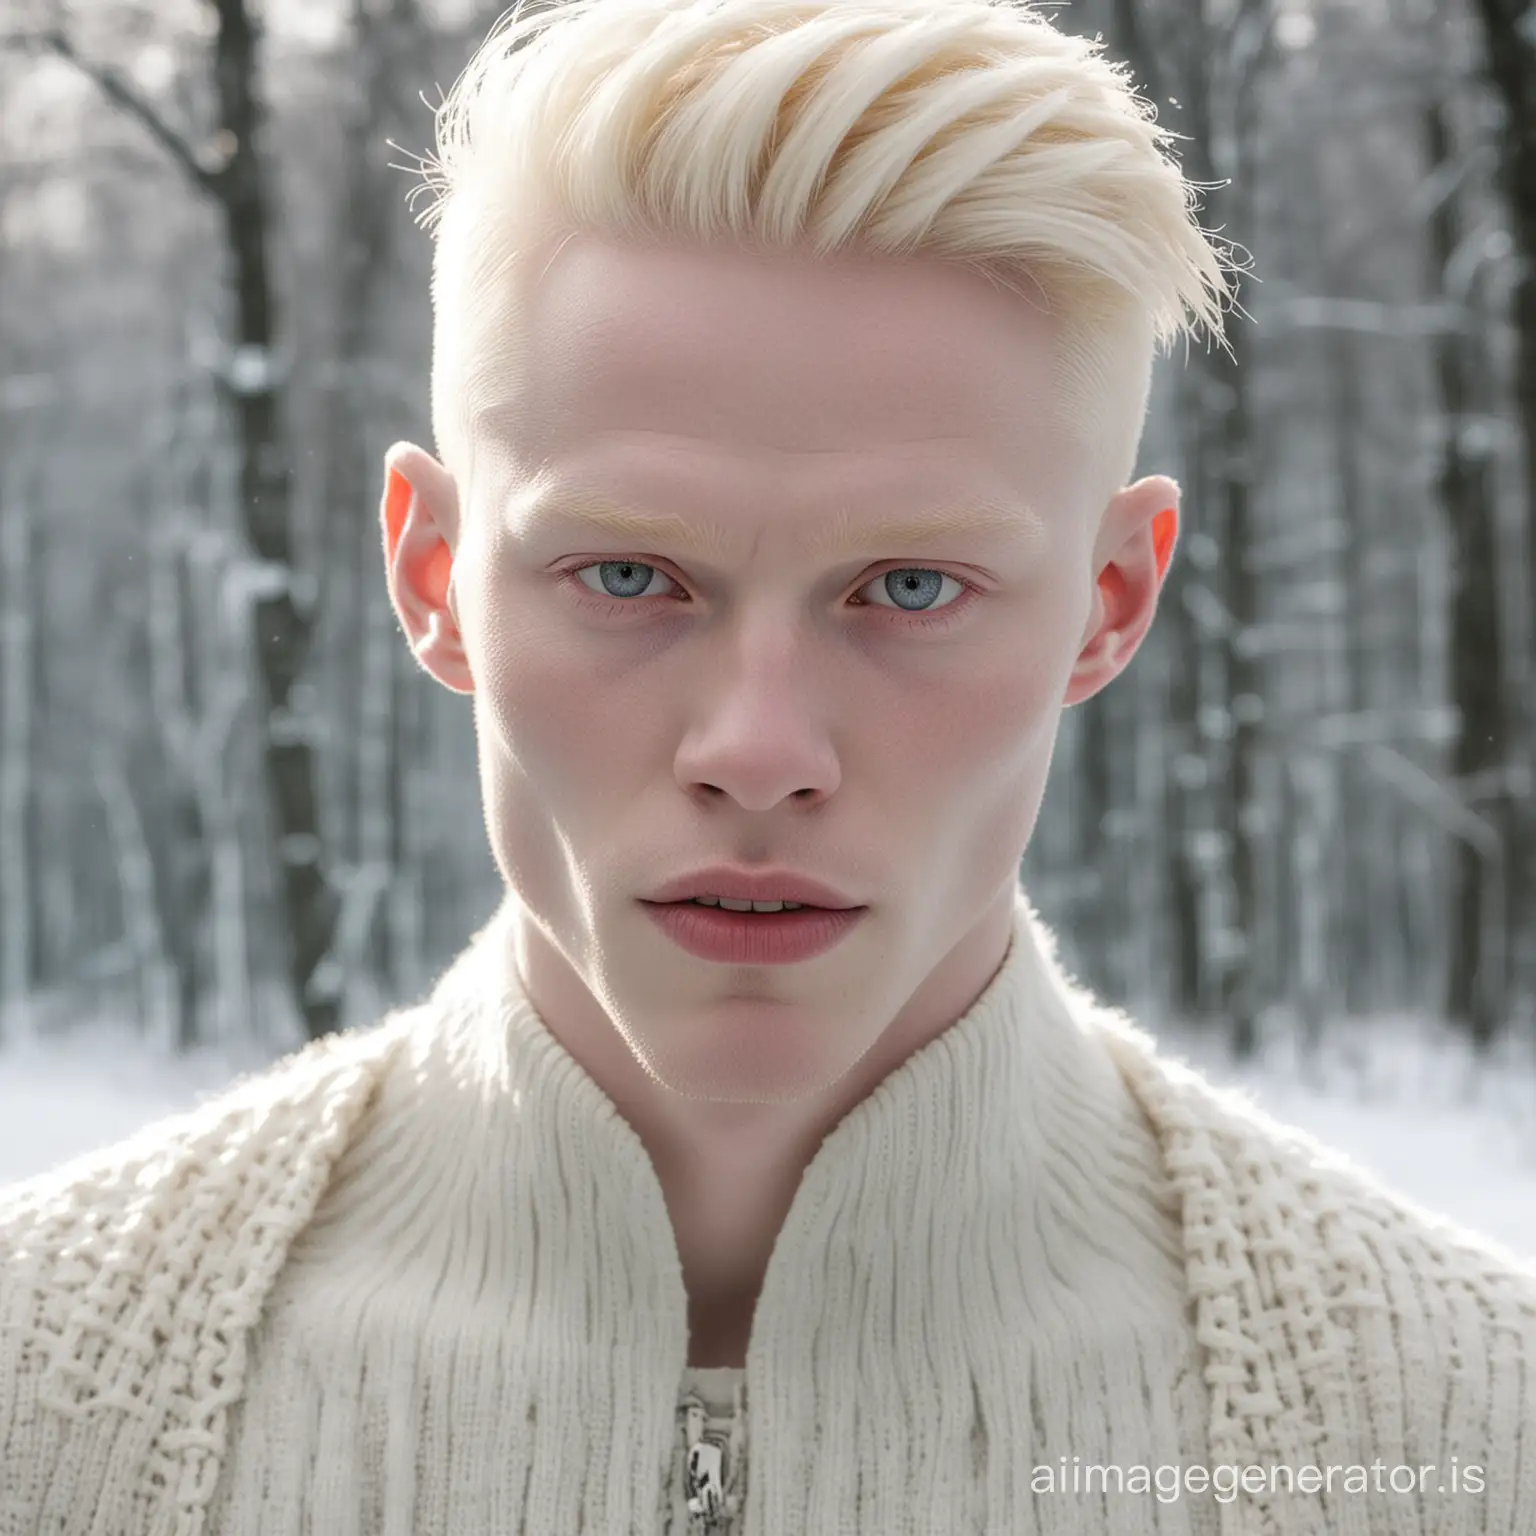 The guy is a handsome albino, of Nordic appearance.